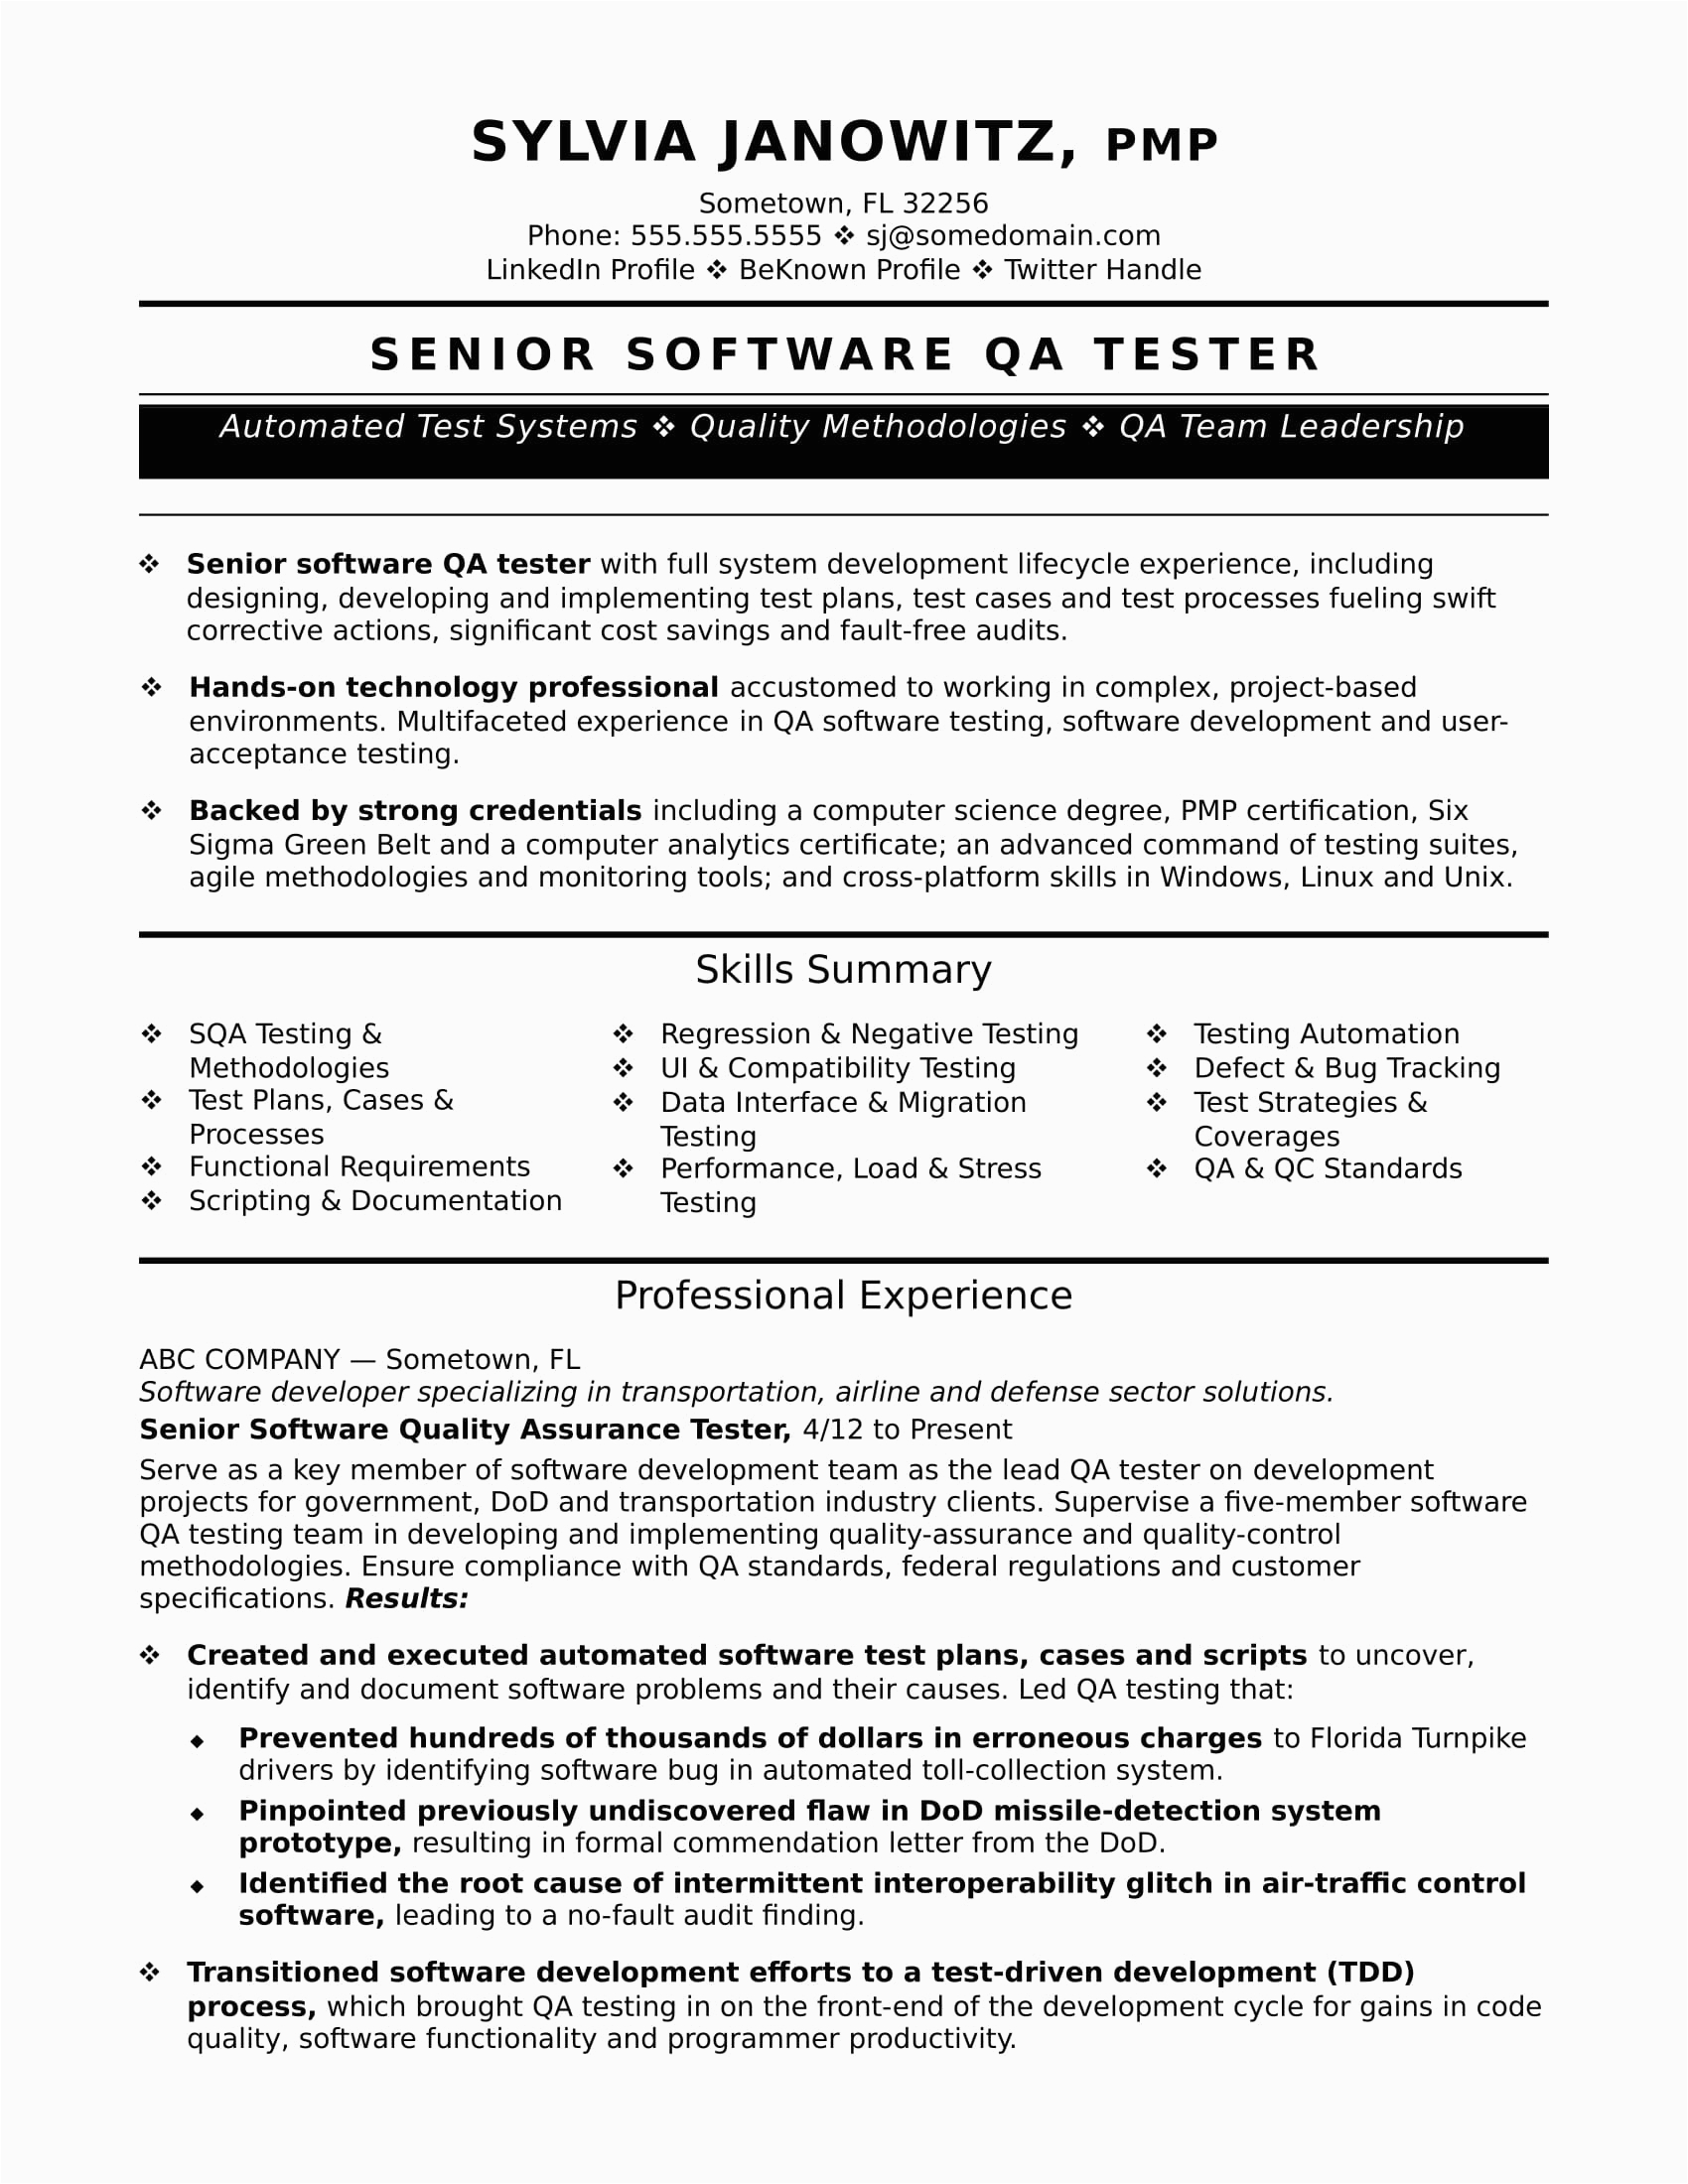 Software Testing Resume Samples for 3 Years Experience Experienced Qa software Tester Resume Sample